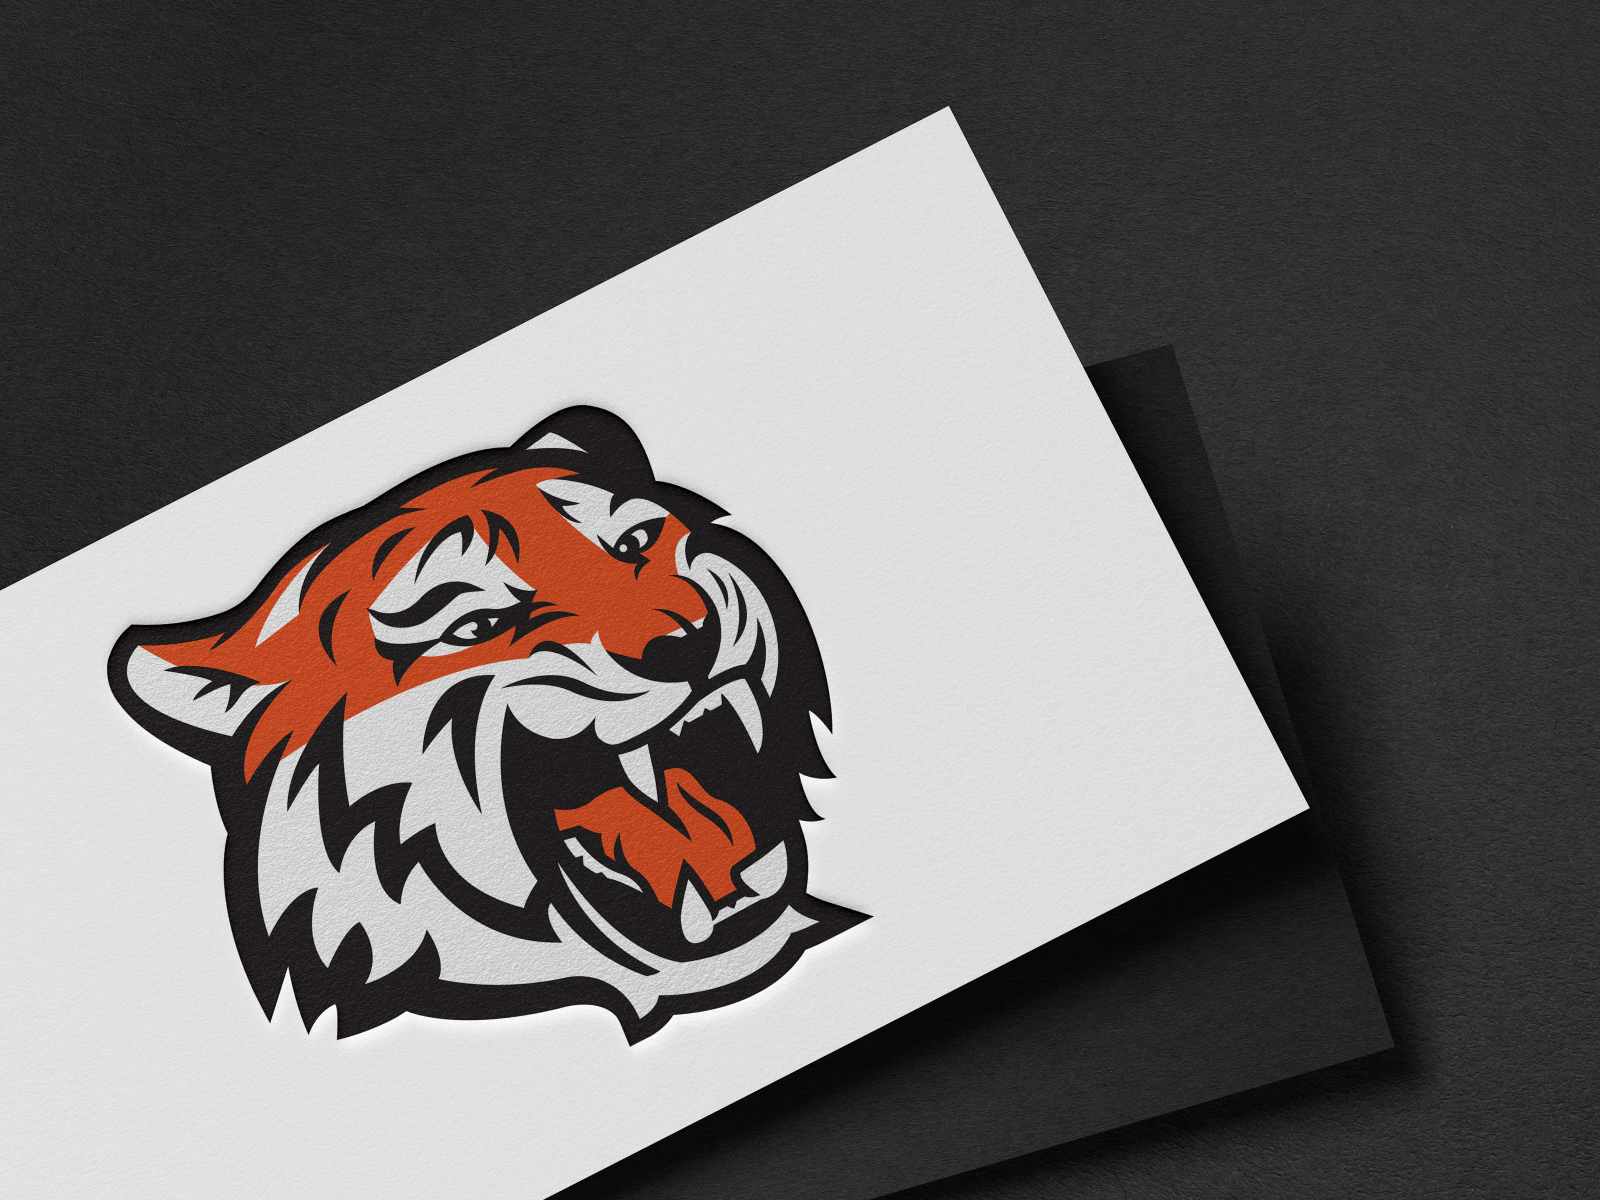 Tiger logo Images - Search Images on Everypixel